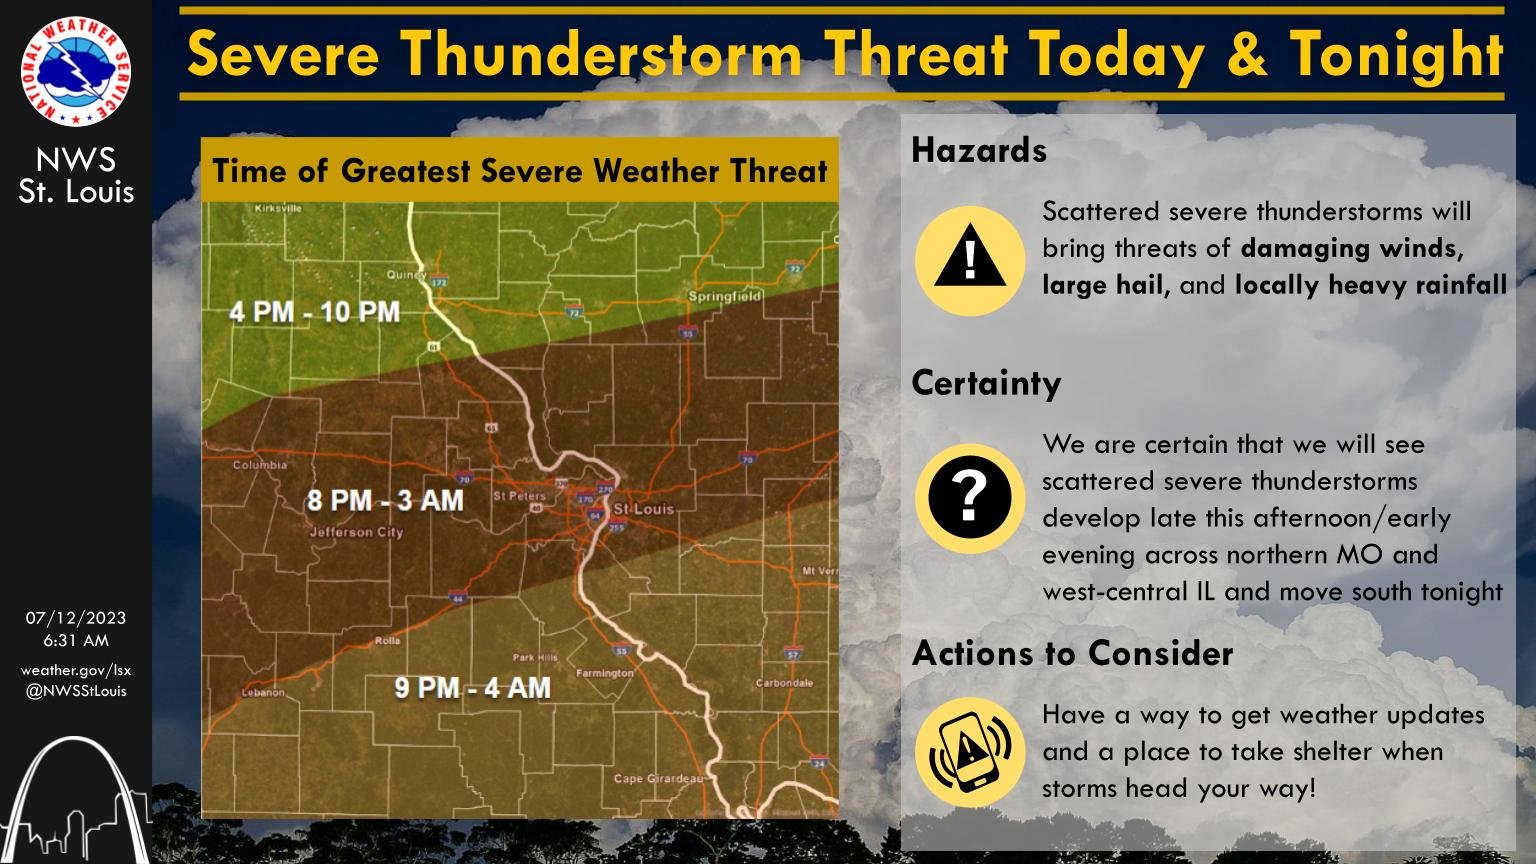 NWS: Mid-Missouri could see damaging winds and hail this evening and overnight